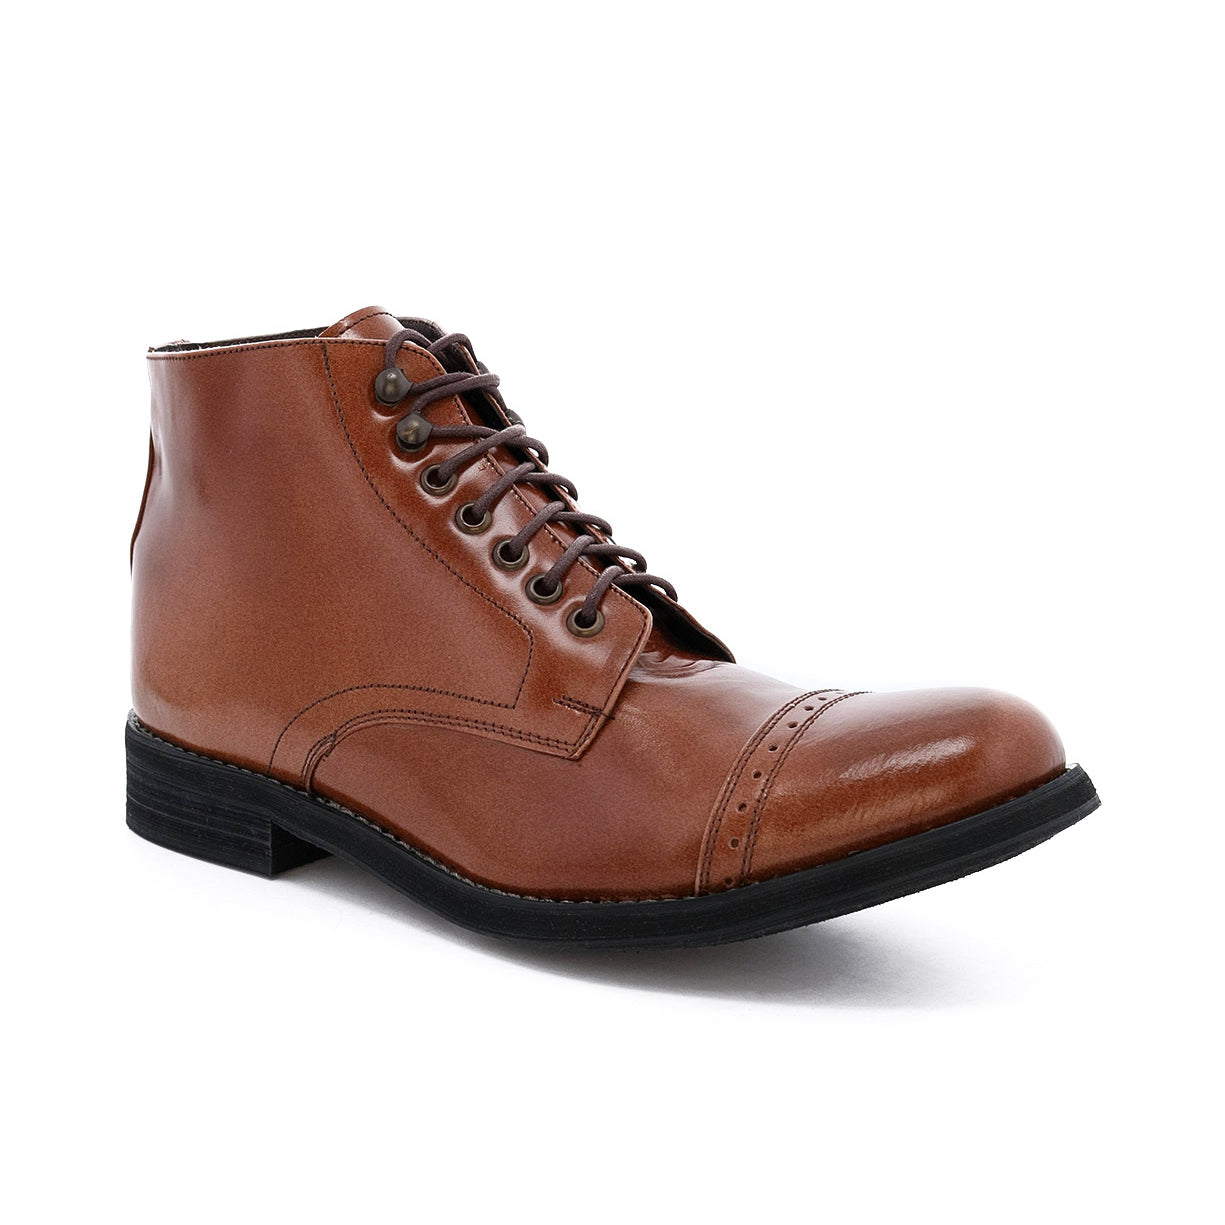 A sophisticated men's Howitzer short boot in tan leather, perfect for casual occasions, by Oak Tree Farms.